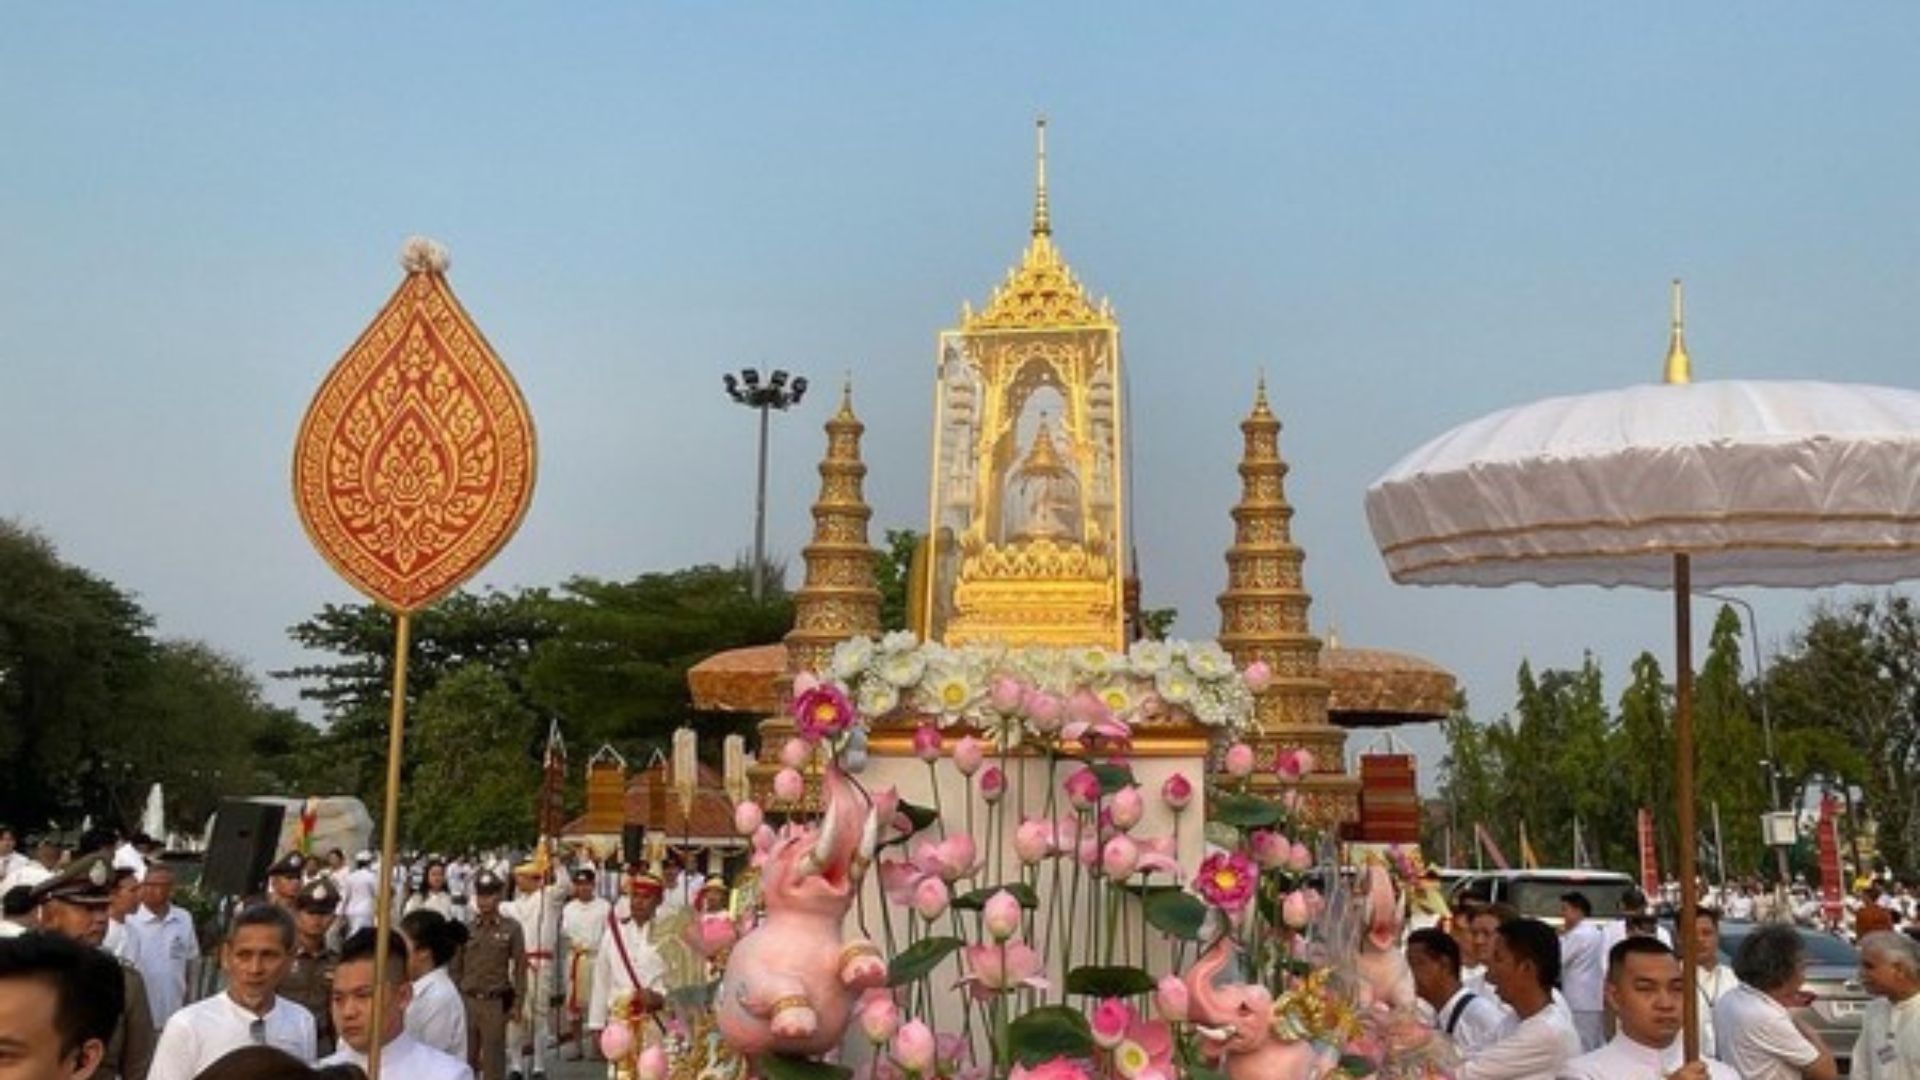 Thousands Pay Respects To Lord Buddha's Relics in Ubon Ratchathani